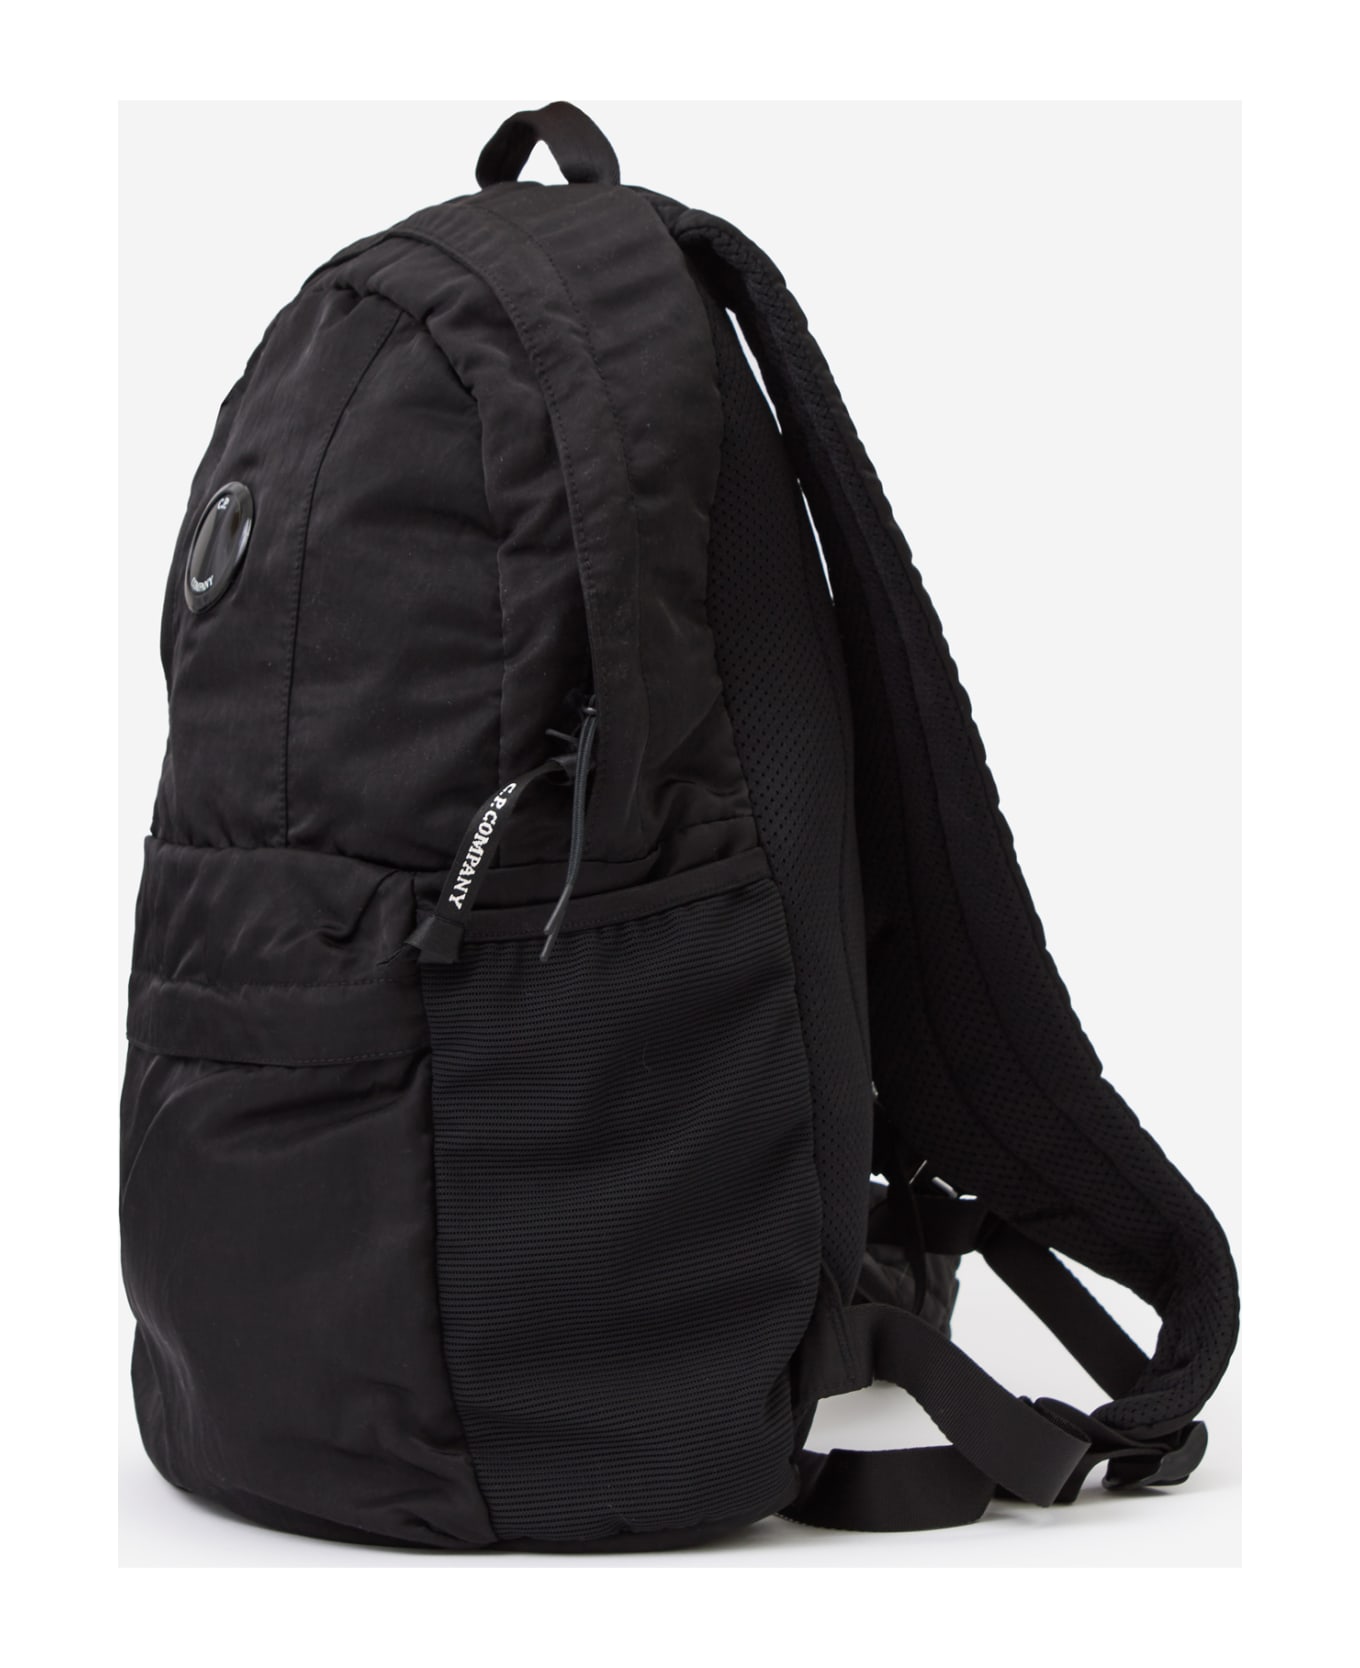 C.P. Company Backpack - Nero バックパック